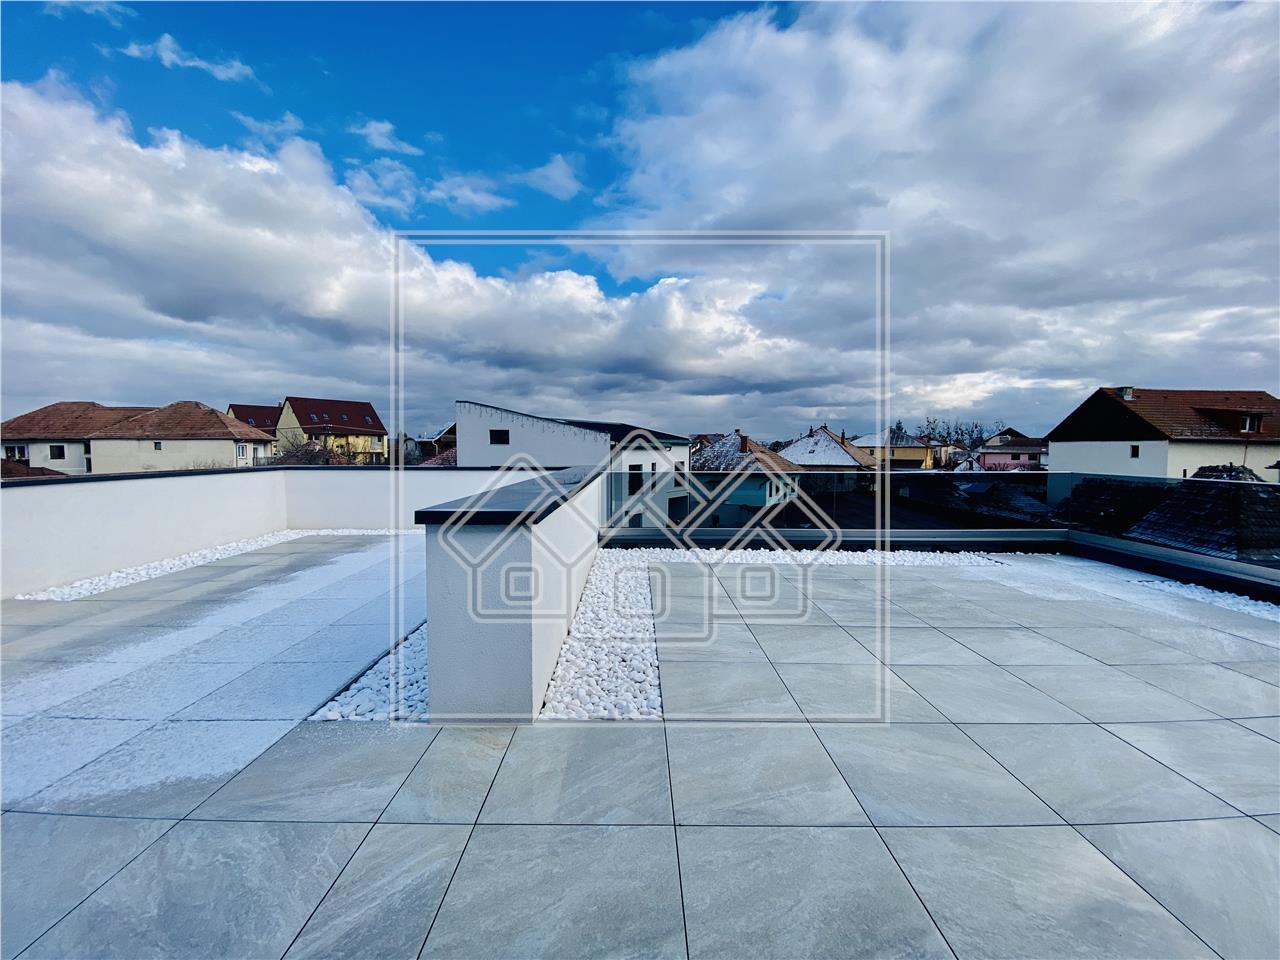 Office for rent in Sibiu -  2 large terraces of 150 sqm.